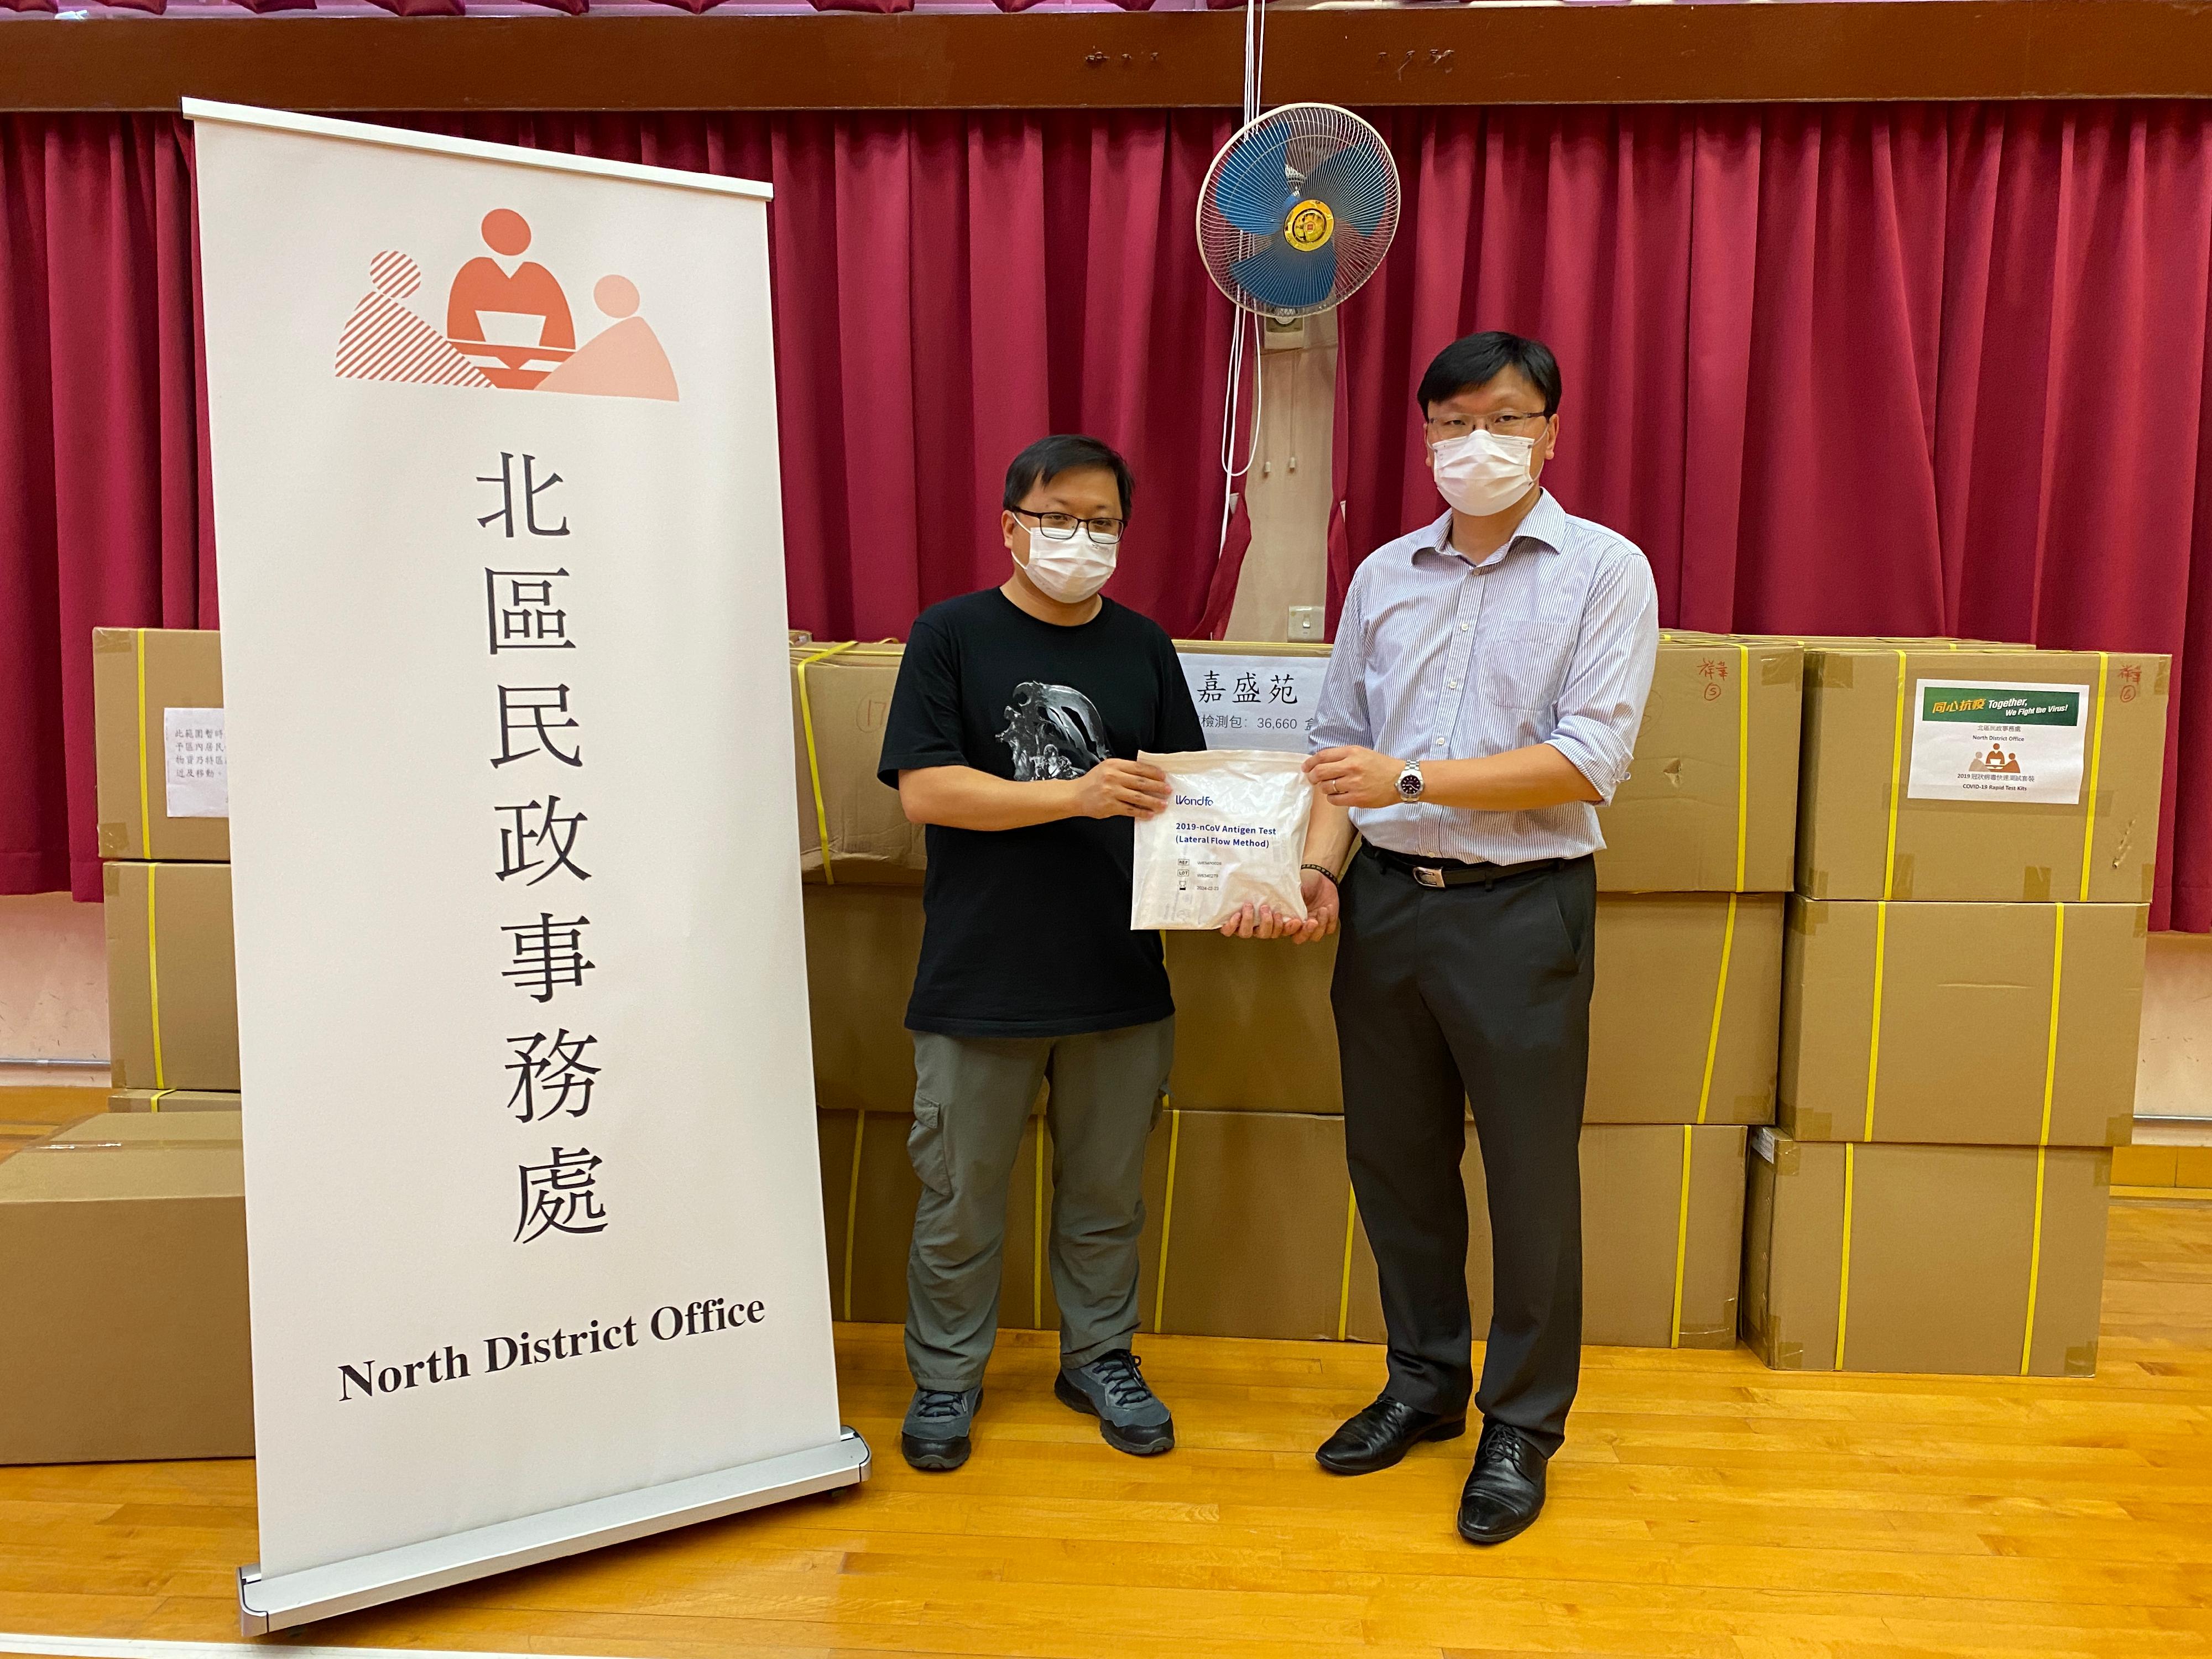 The North District Office today (July 19) distributed COVID-19 rapid test kits to households, cleansing workers and property management staff living and working in Ka Shing Court for voluntary testing through the property management company.